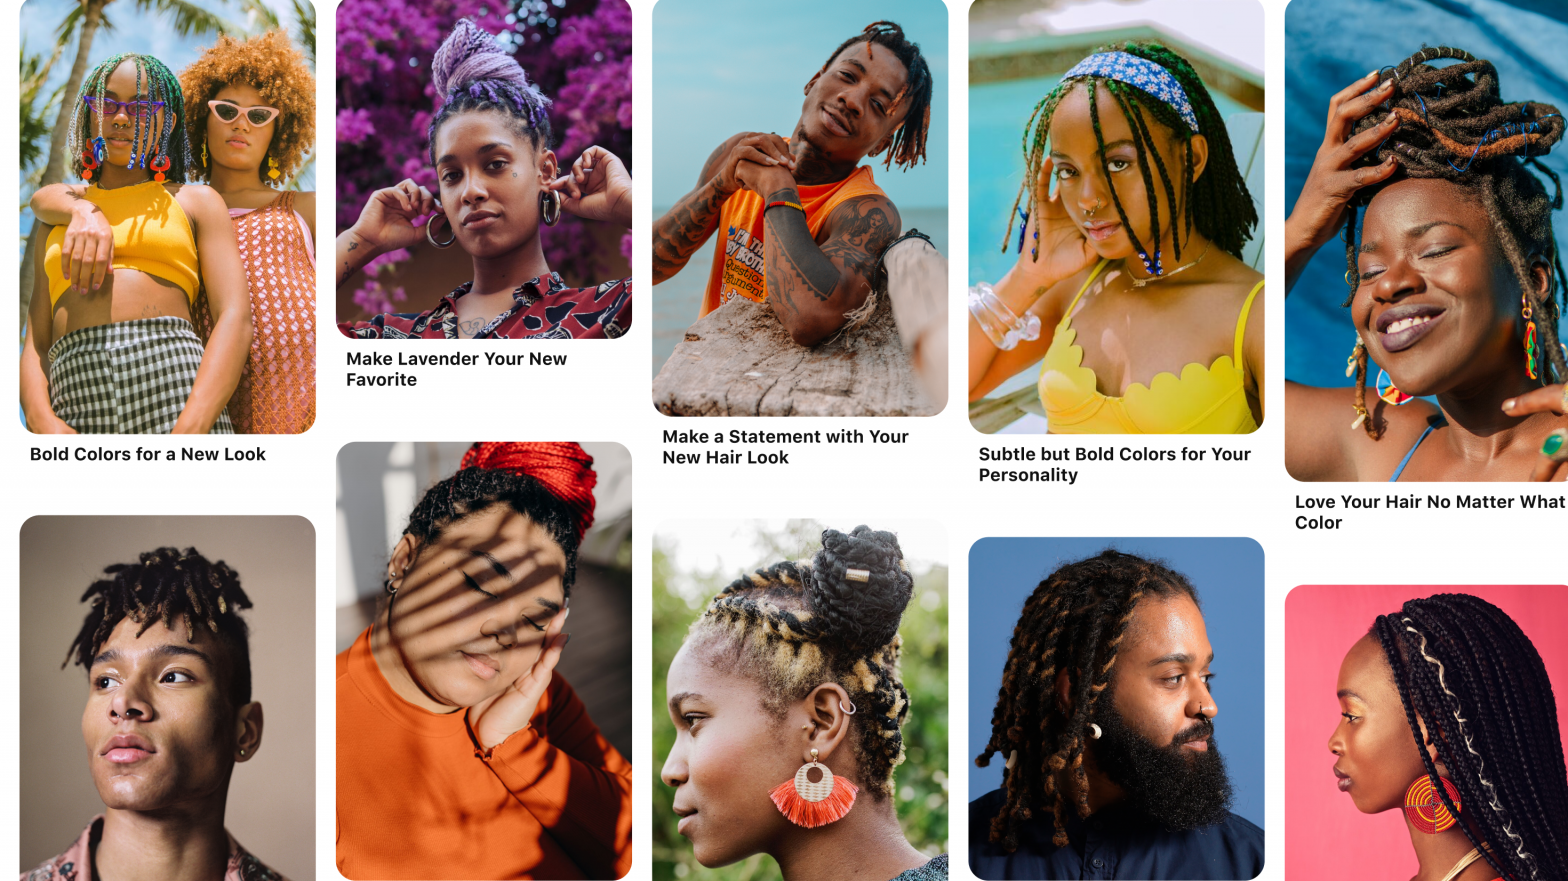 Pinterest Introduces An Inclusive Search Option That Celebrates Our Black Hair